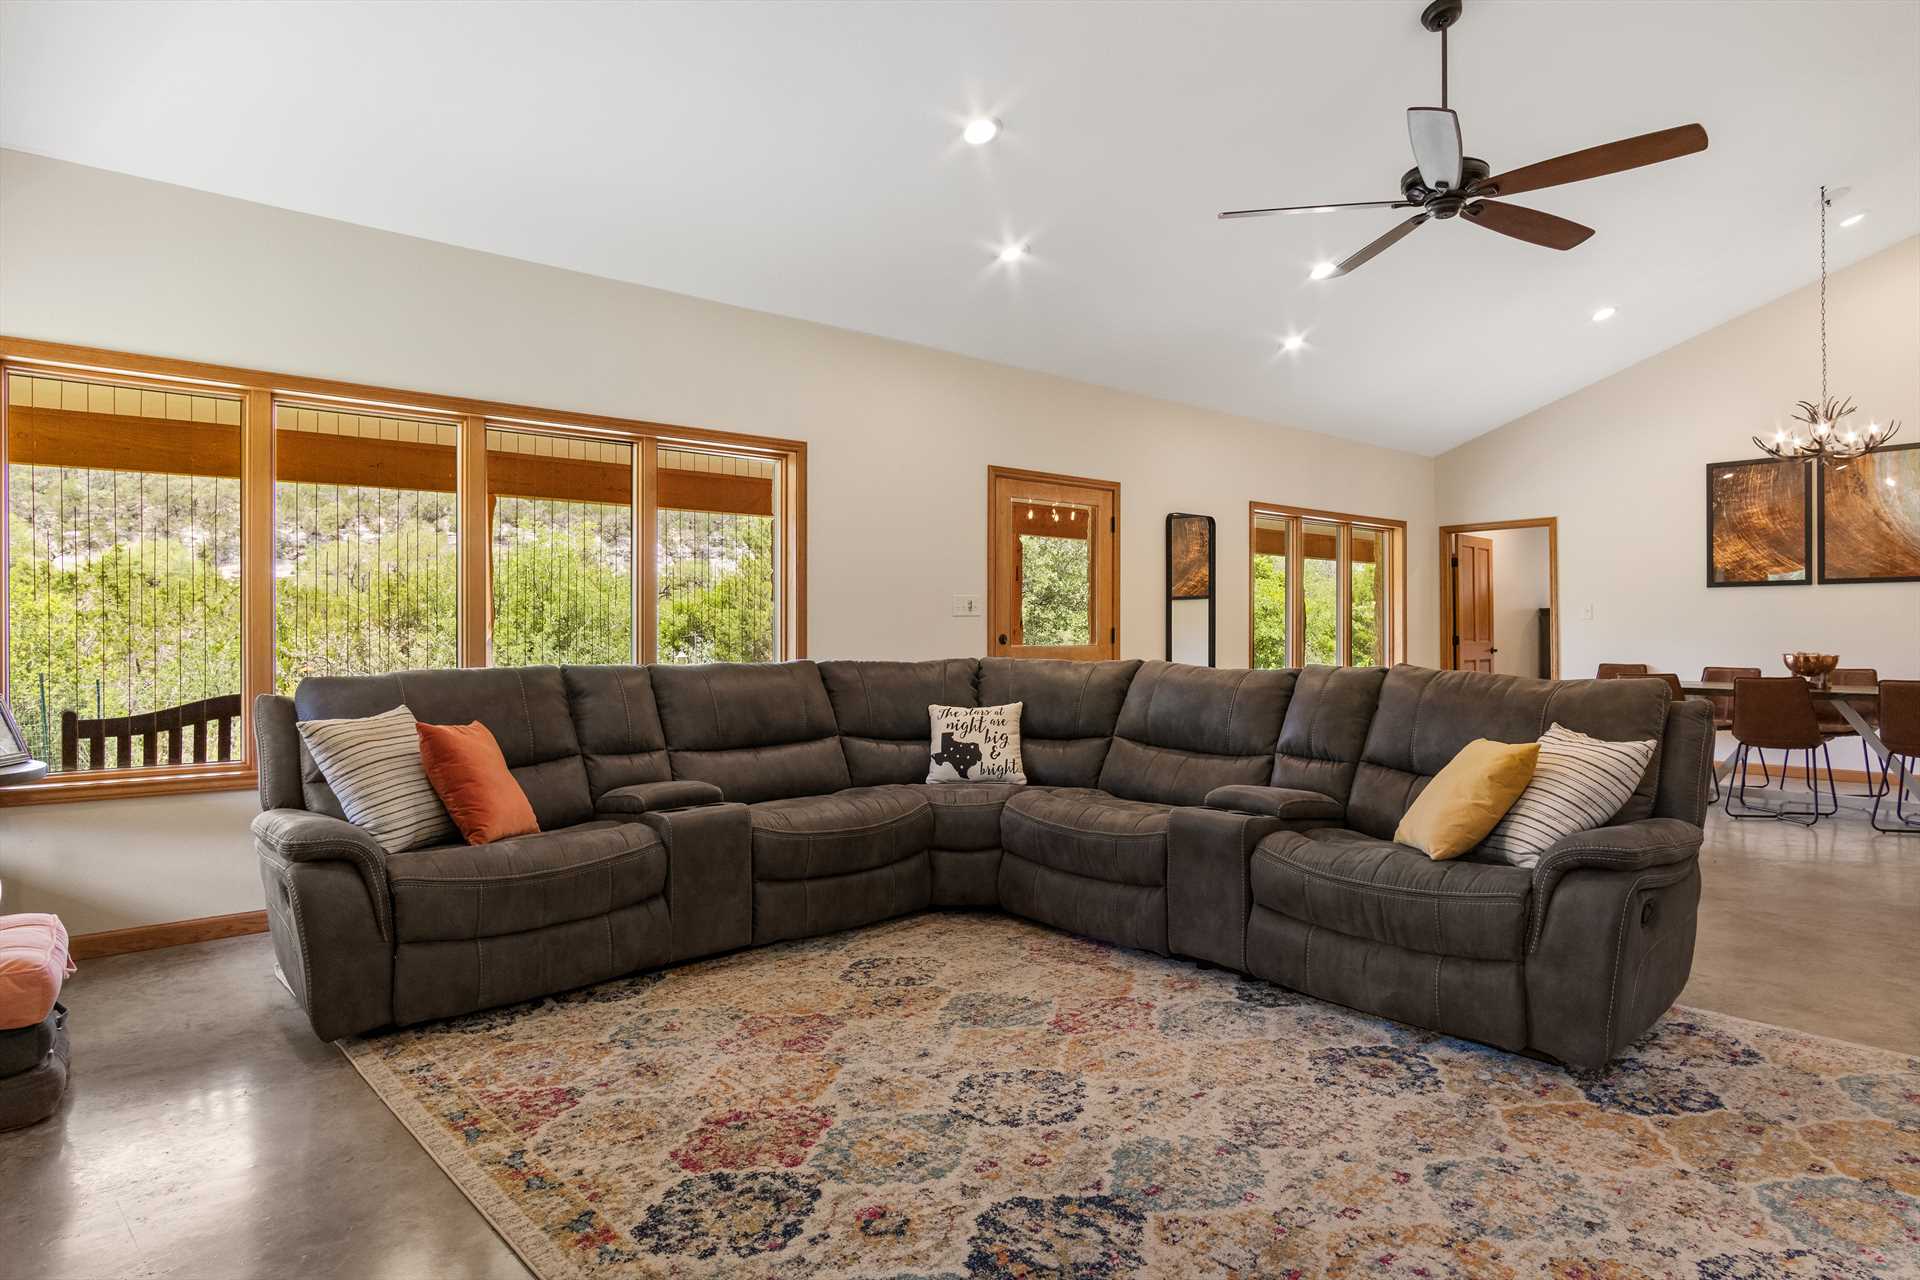                                                 Everyone will have plenty of leg-stretching space on the living room's plush and comfy gigantic sectional sofa!